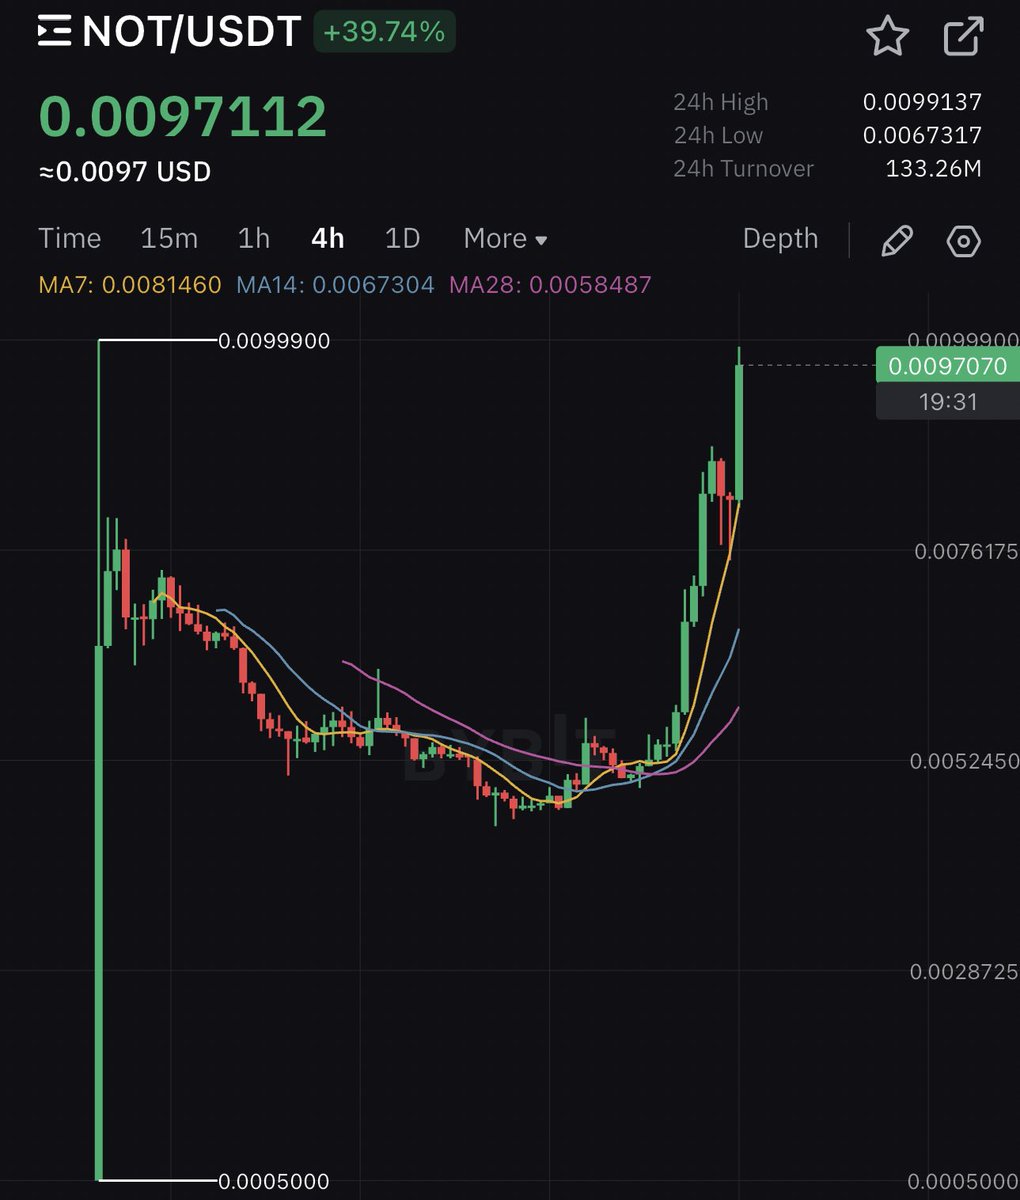 #NOTCOIN WILL SURPASS $1 MARK MY WORDS. 

Who else is accumulated at the bottom a week ago?